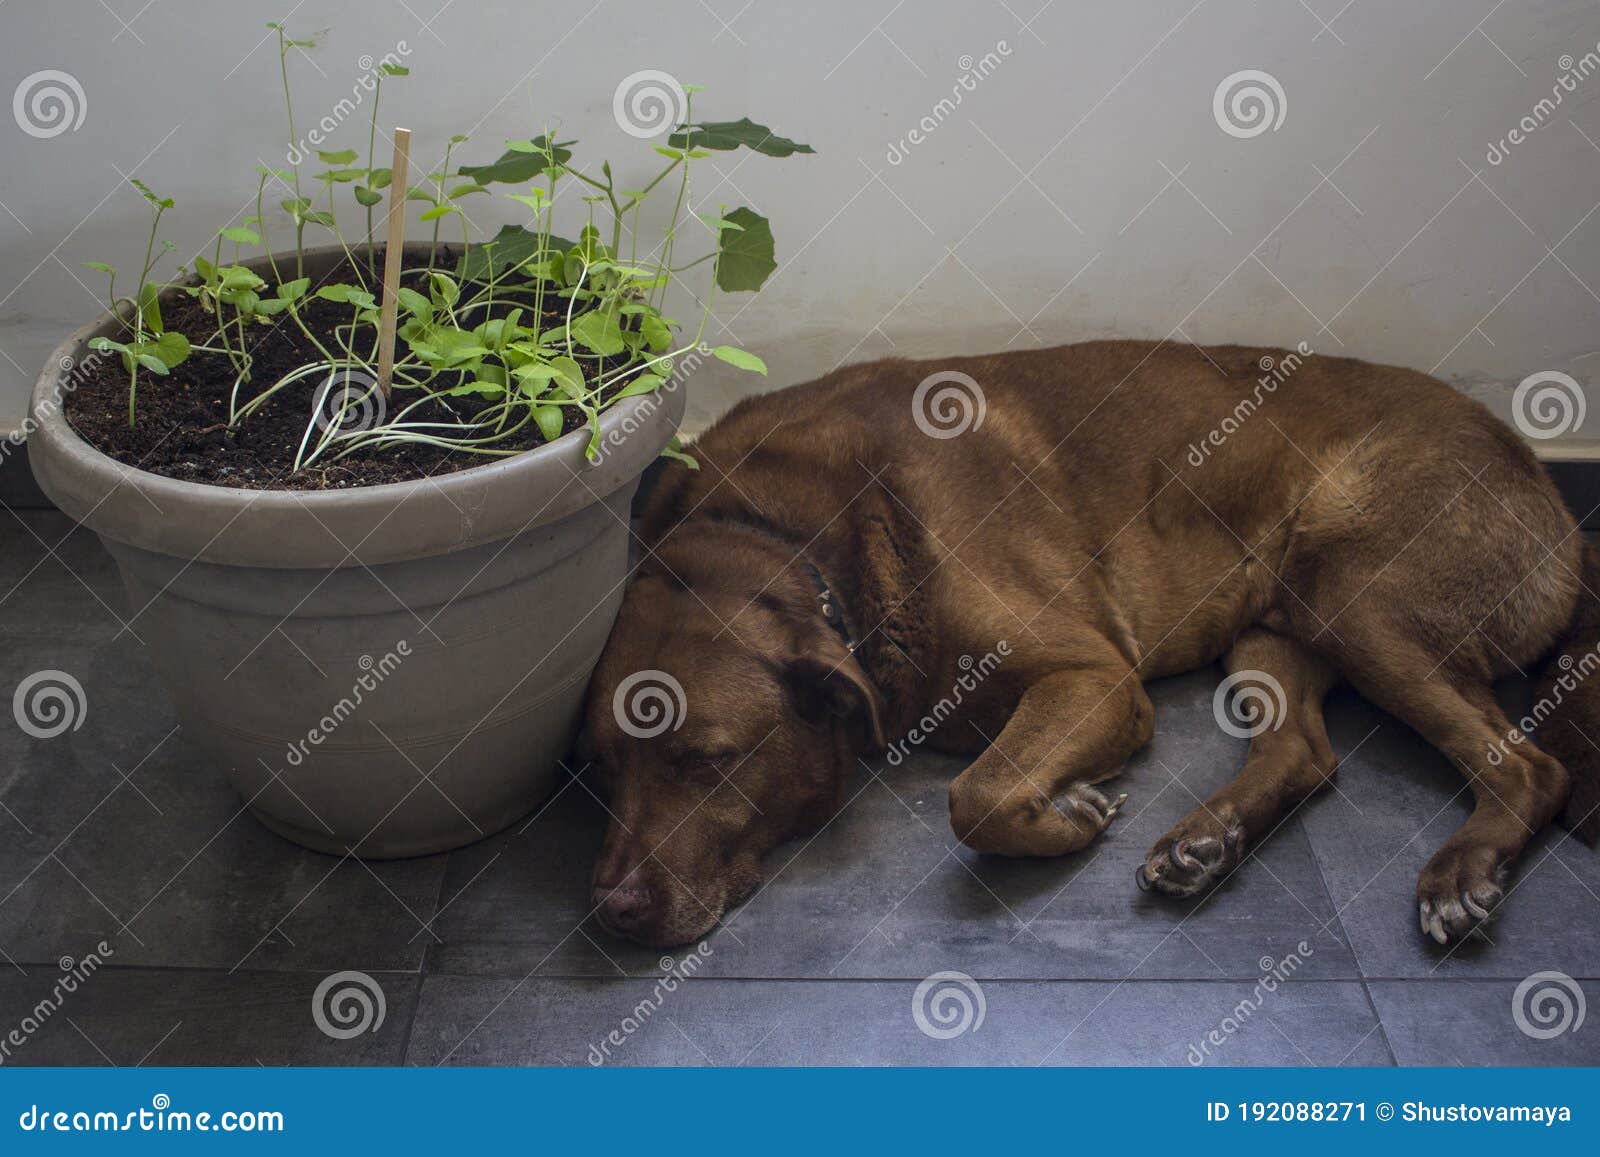 Dog laying on the floor stock image. Image of home, plant - 192088271